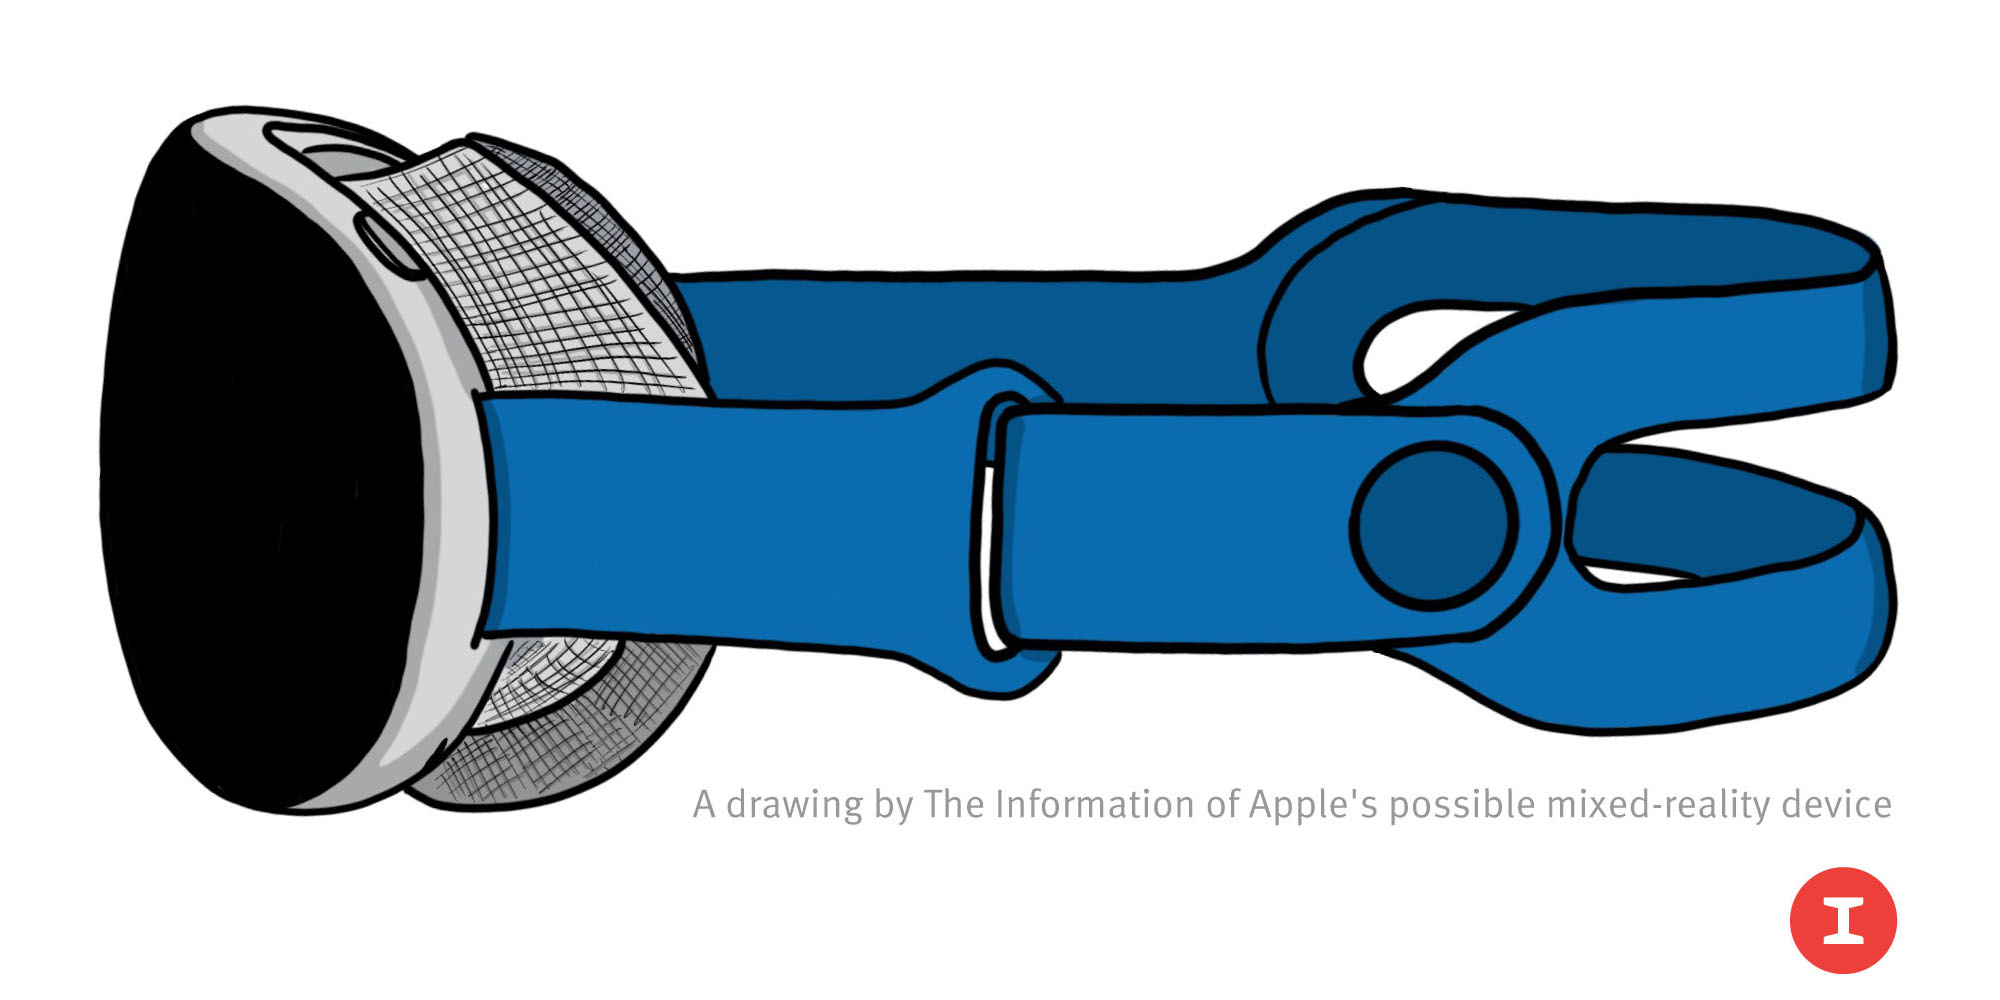 A drawing of Apple's possible mixed-reality device by The Information.